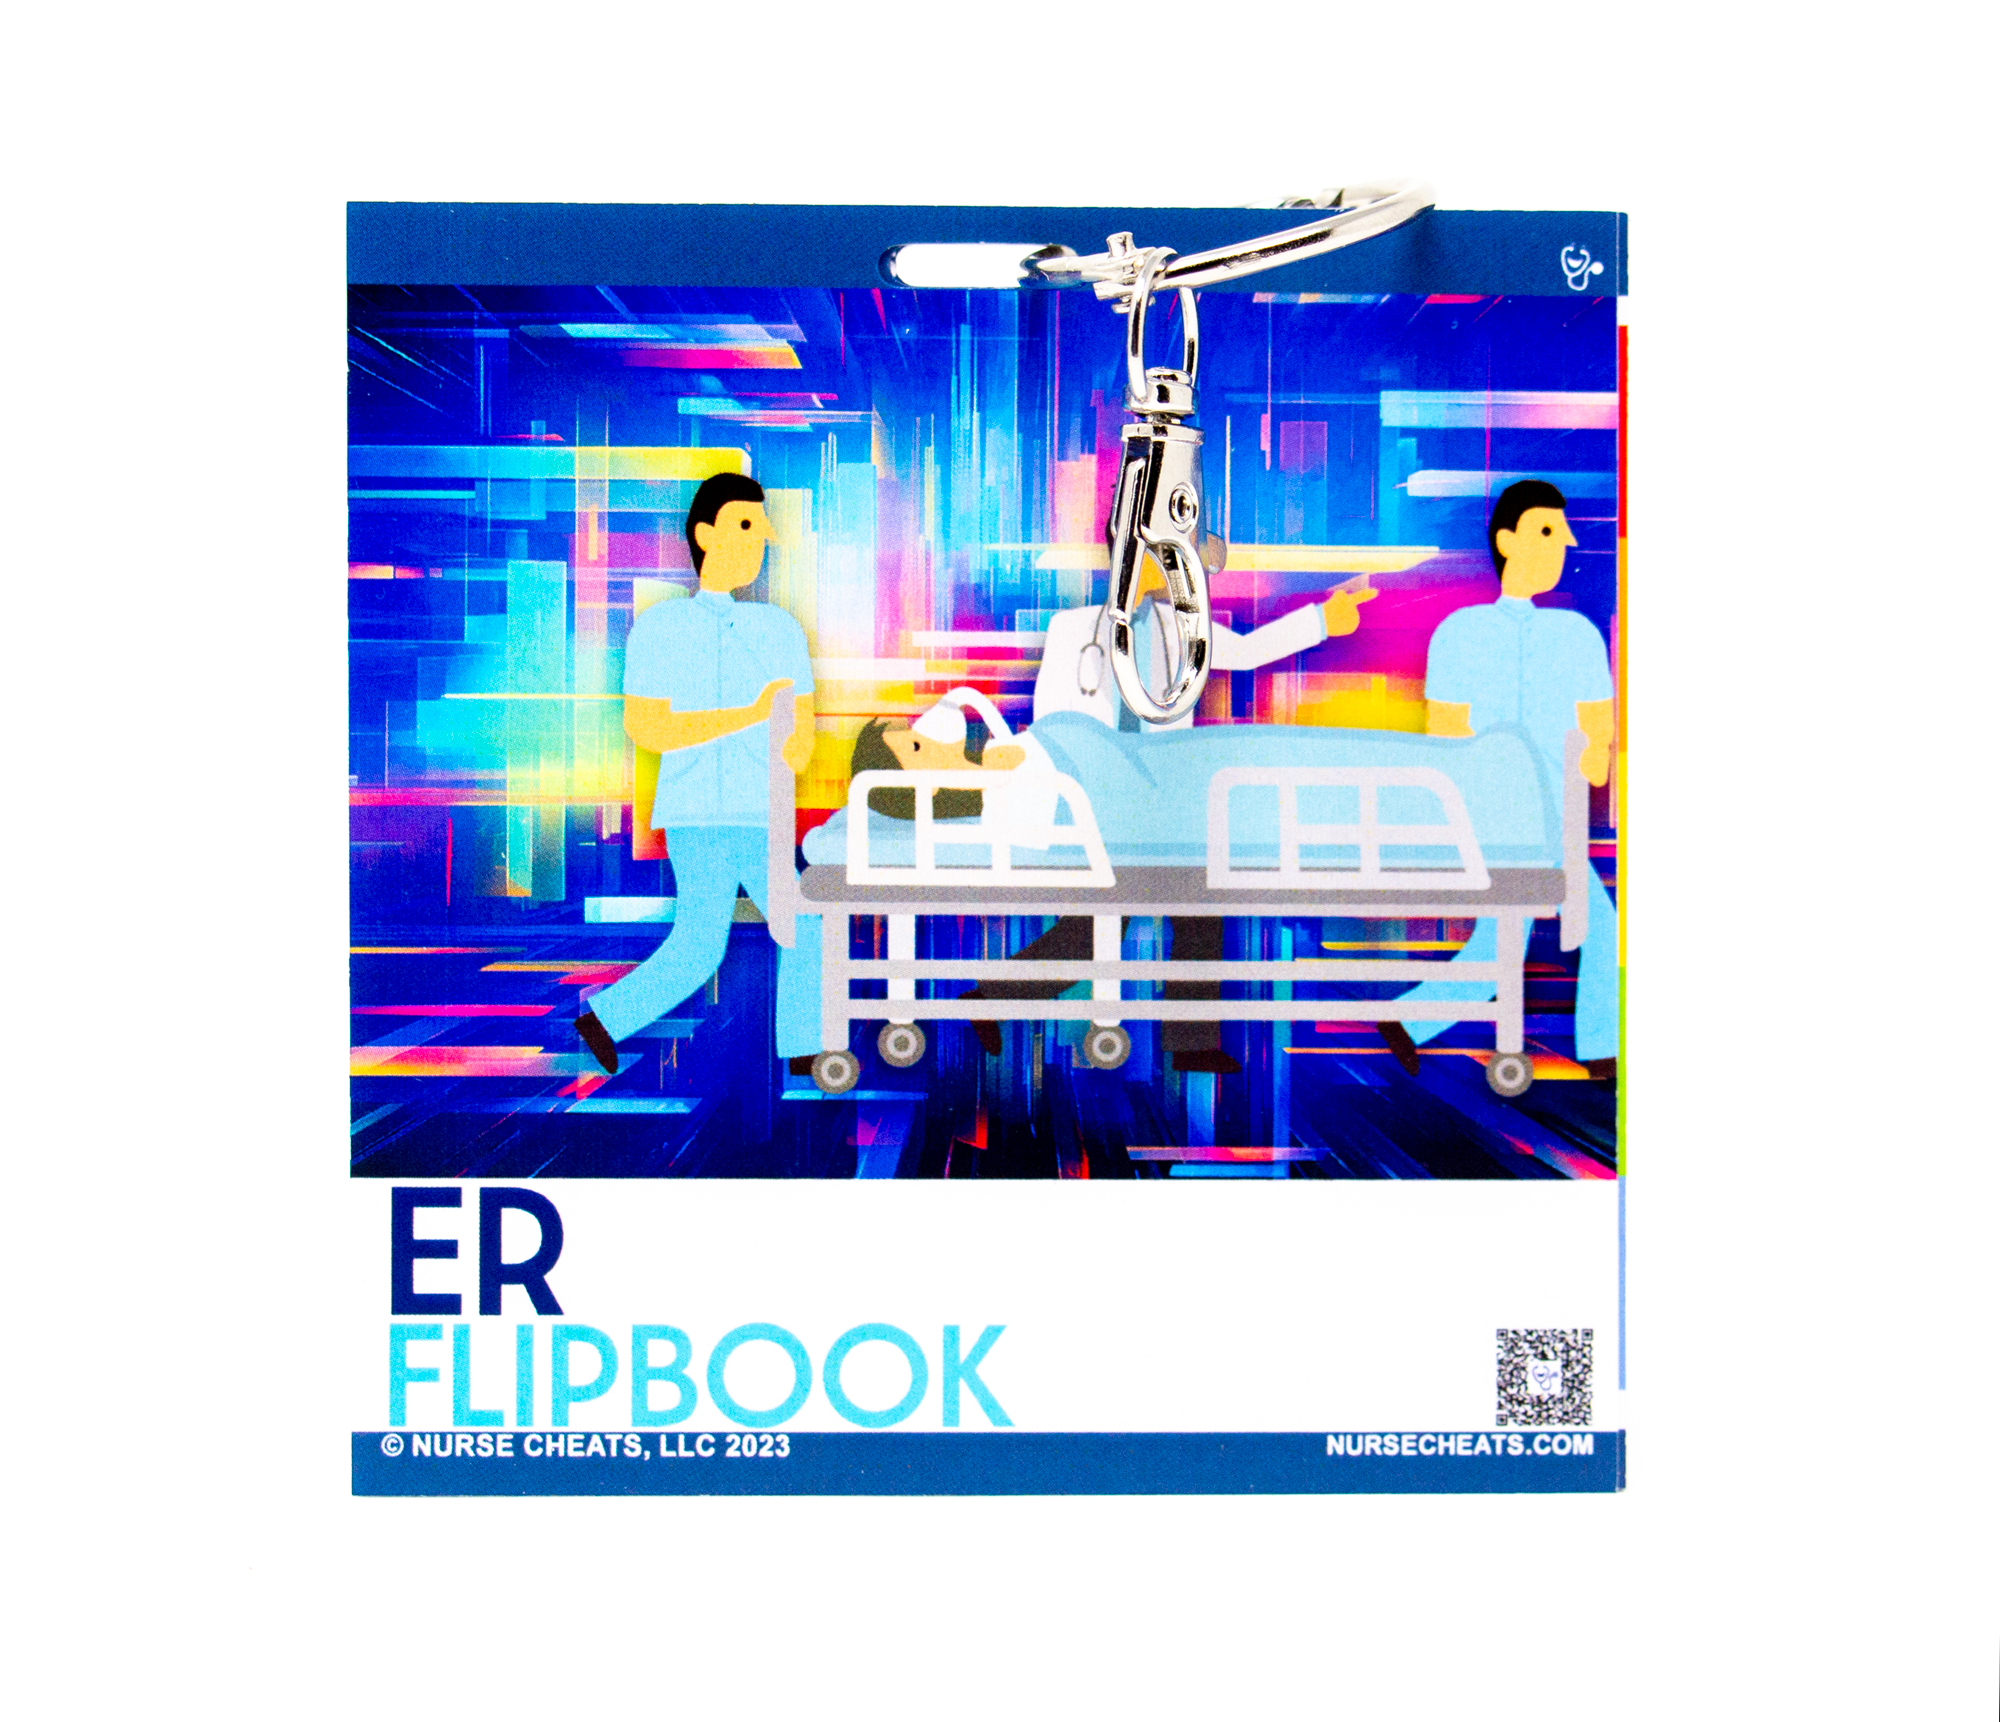 Our ER Flip Book is the perfect emergency medicine guide for any medical professional. Packed with concise instructions on how to handle a variety of medical emergencies, this flip book is a must-have for any emergency room. Stay prepared with the ER Flip Book.